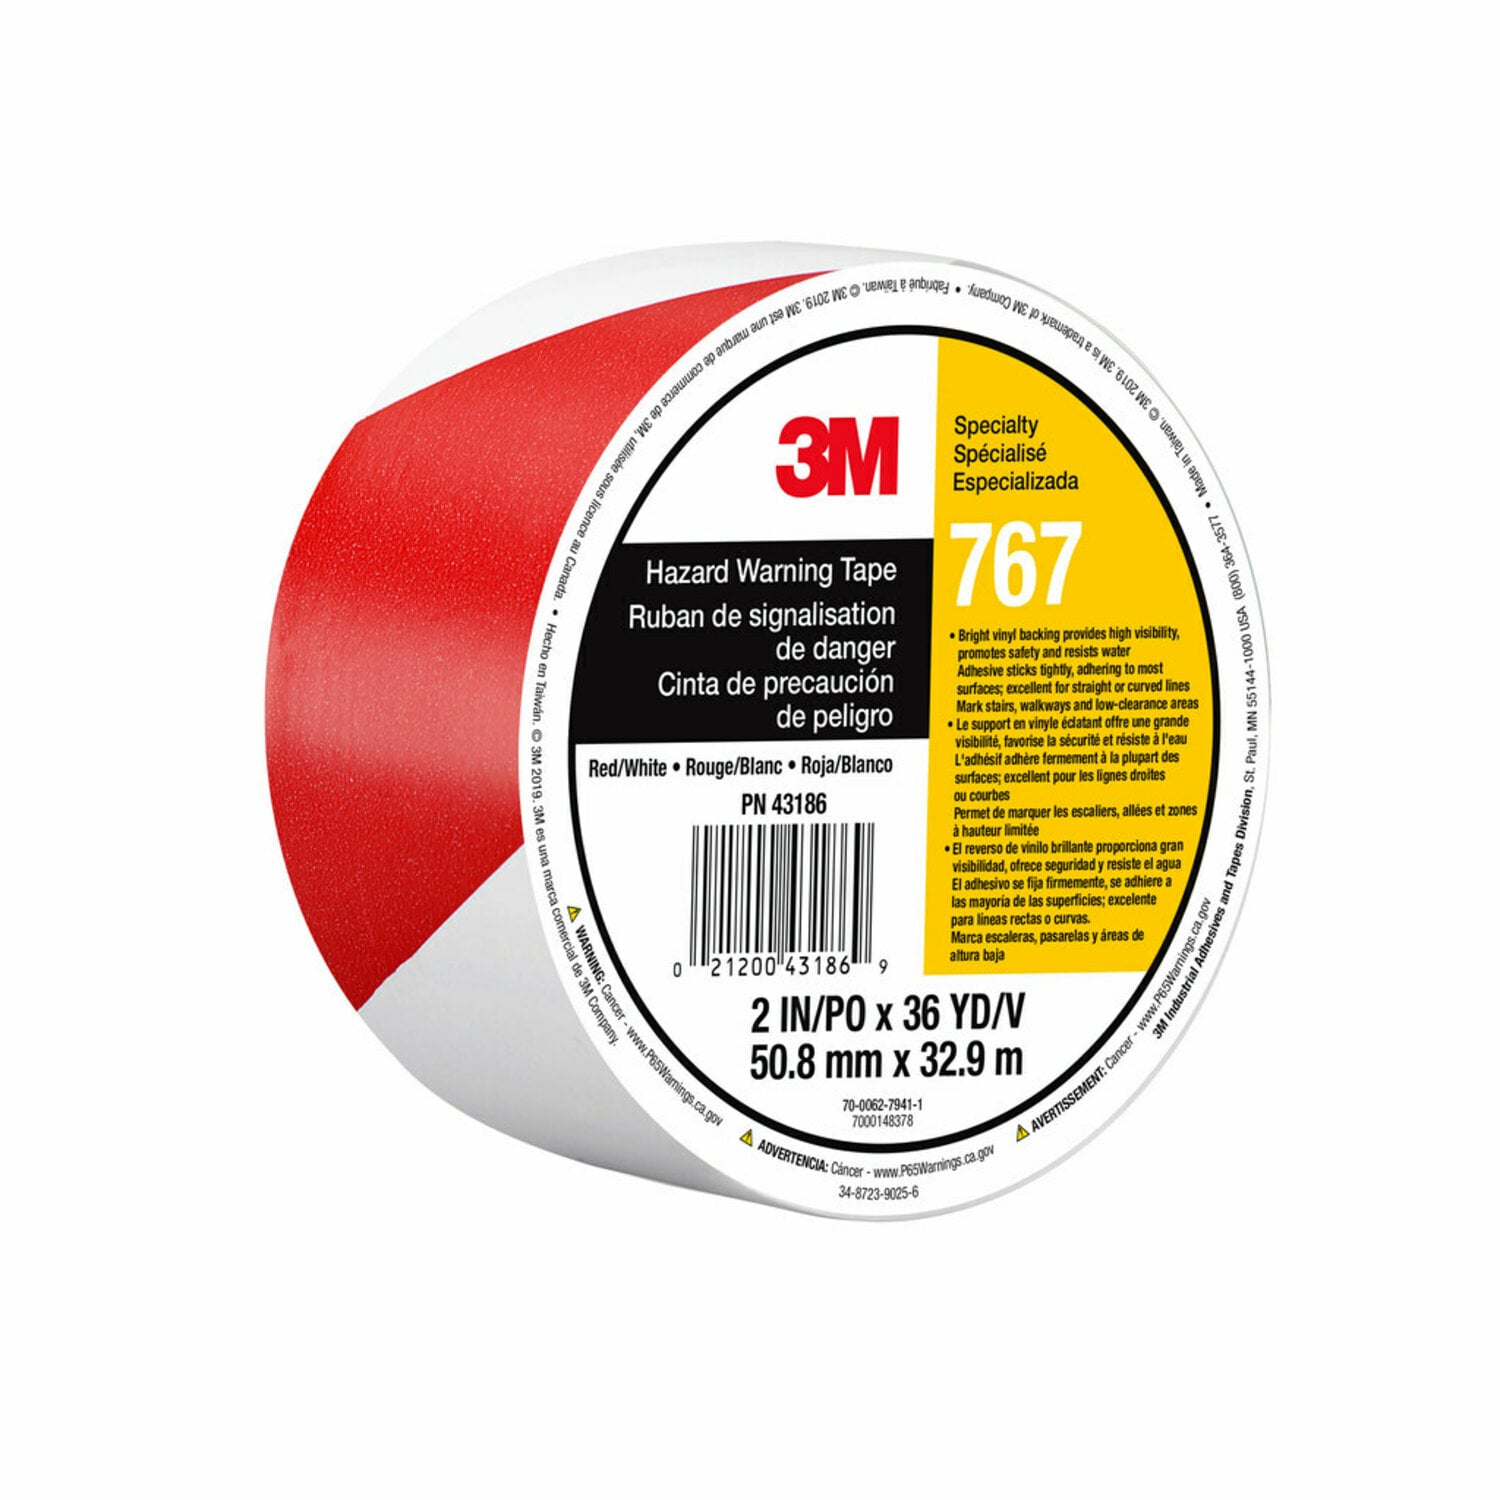 7010412585 - 3M Safety Stripe Vinyl Tape 767, Red/White, 3 in x 36 yd, 5 mil, 12 Roll/Case, Individually Wrapped Conveniently Packaged